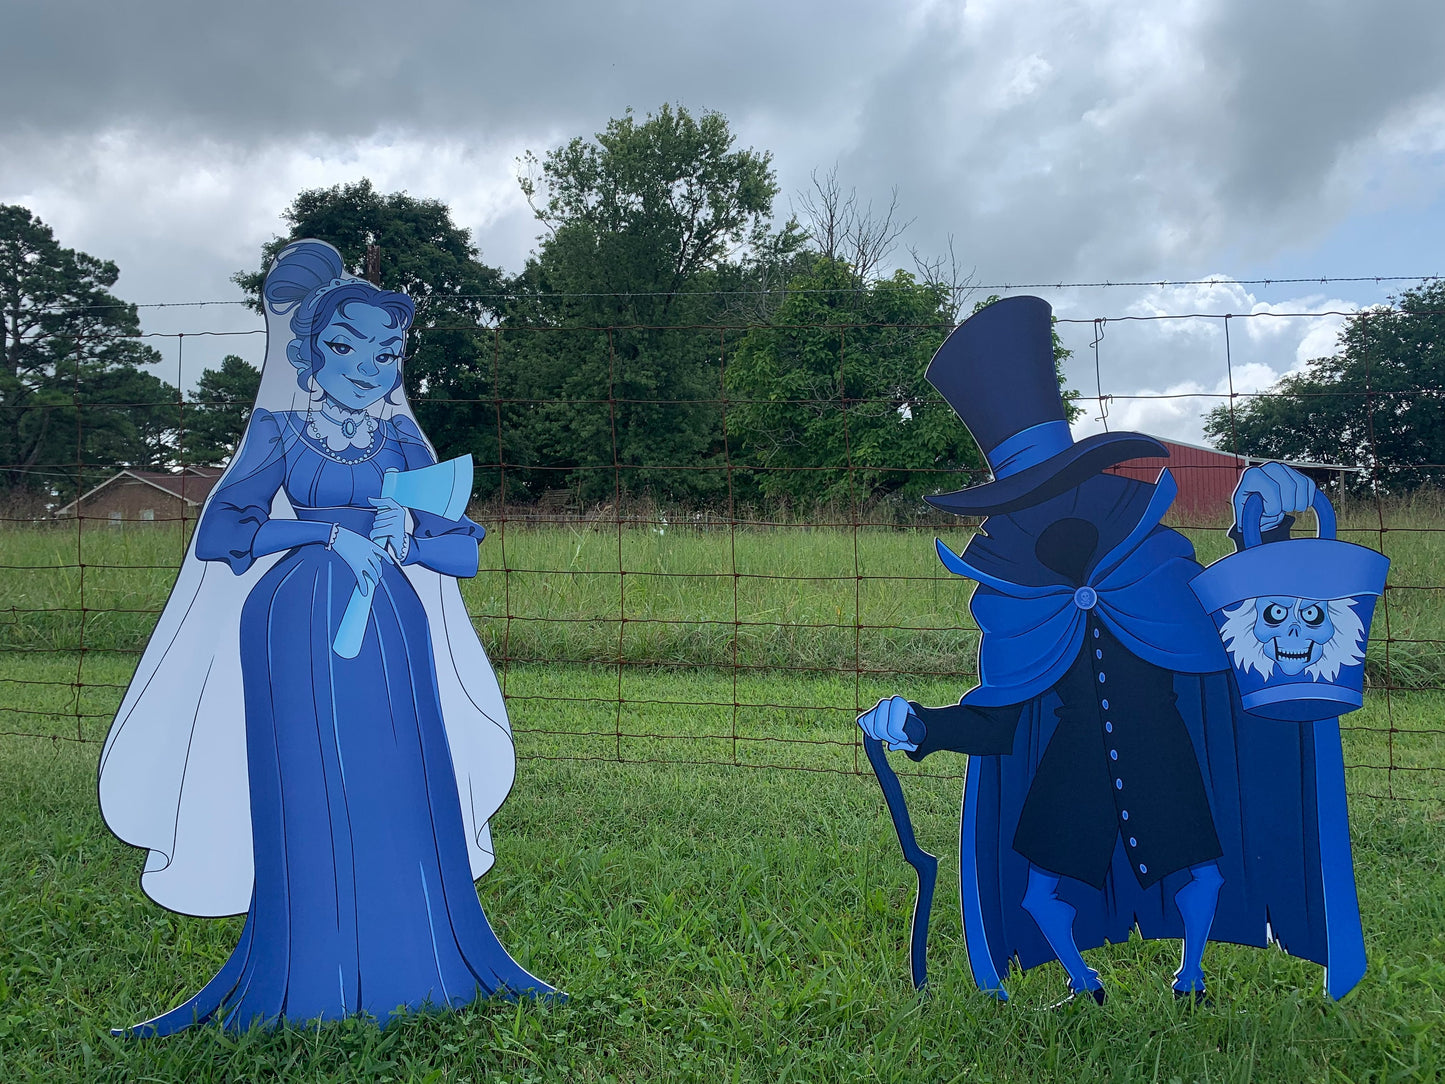 Haunted Mansion ghost bride and Hatbox Ghost Yard display cutouts